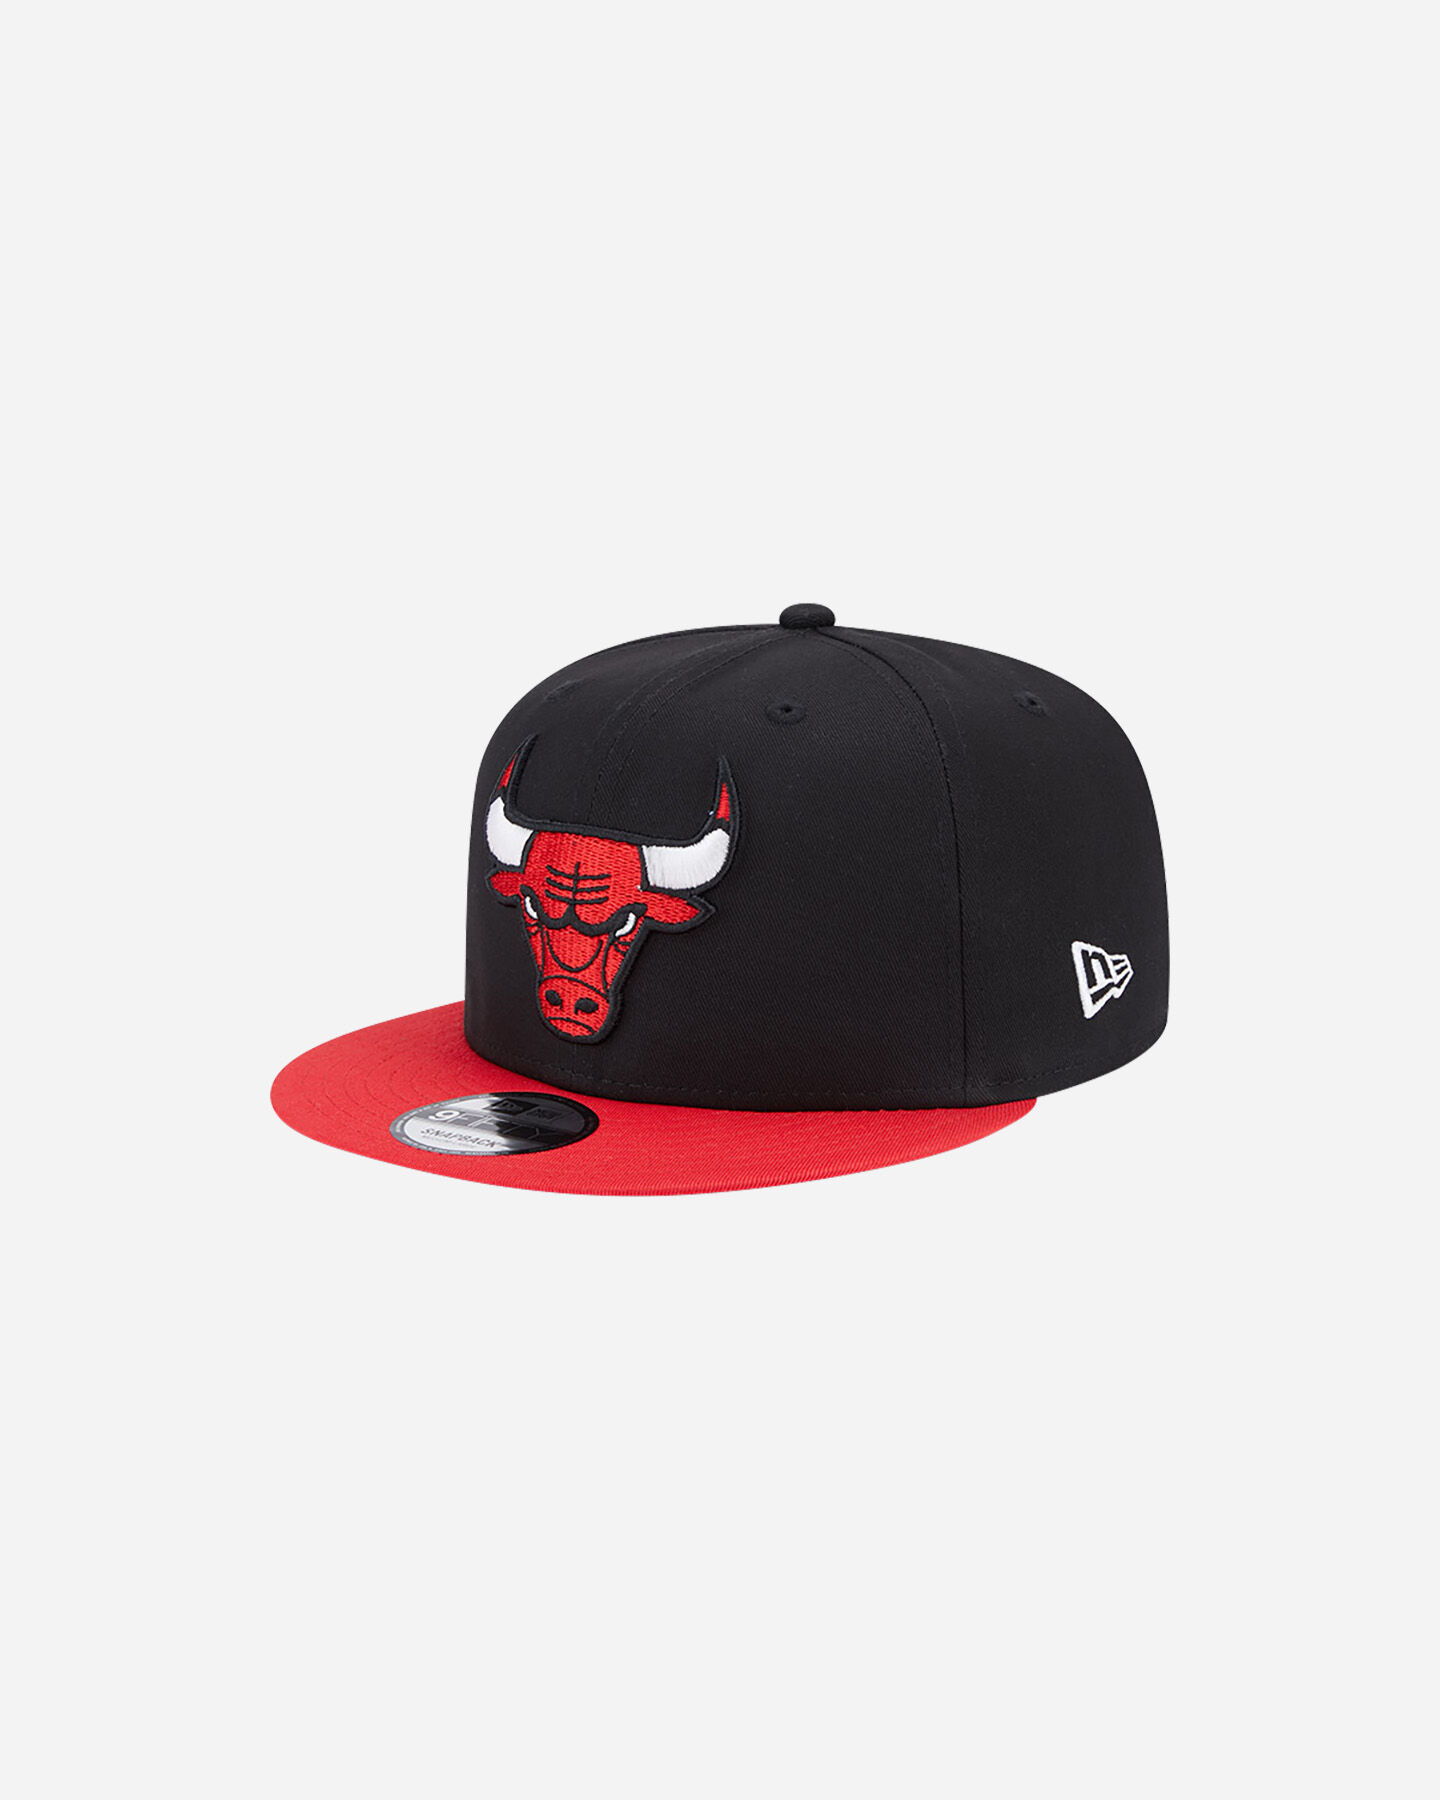  Cappellino NEW ERA 9FIFTY CONTRAST SIDE CHICAGO BULLS  S5606213|001|SM scatto 0